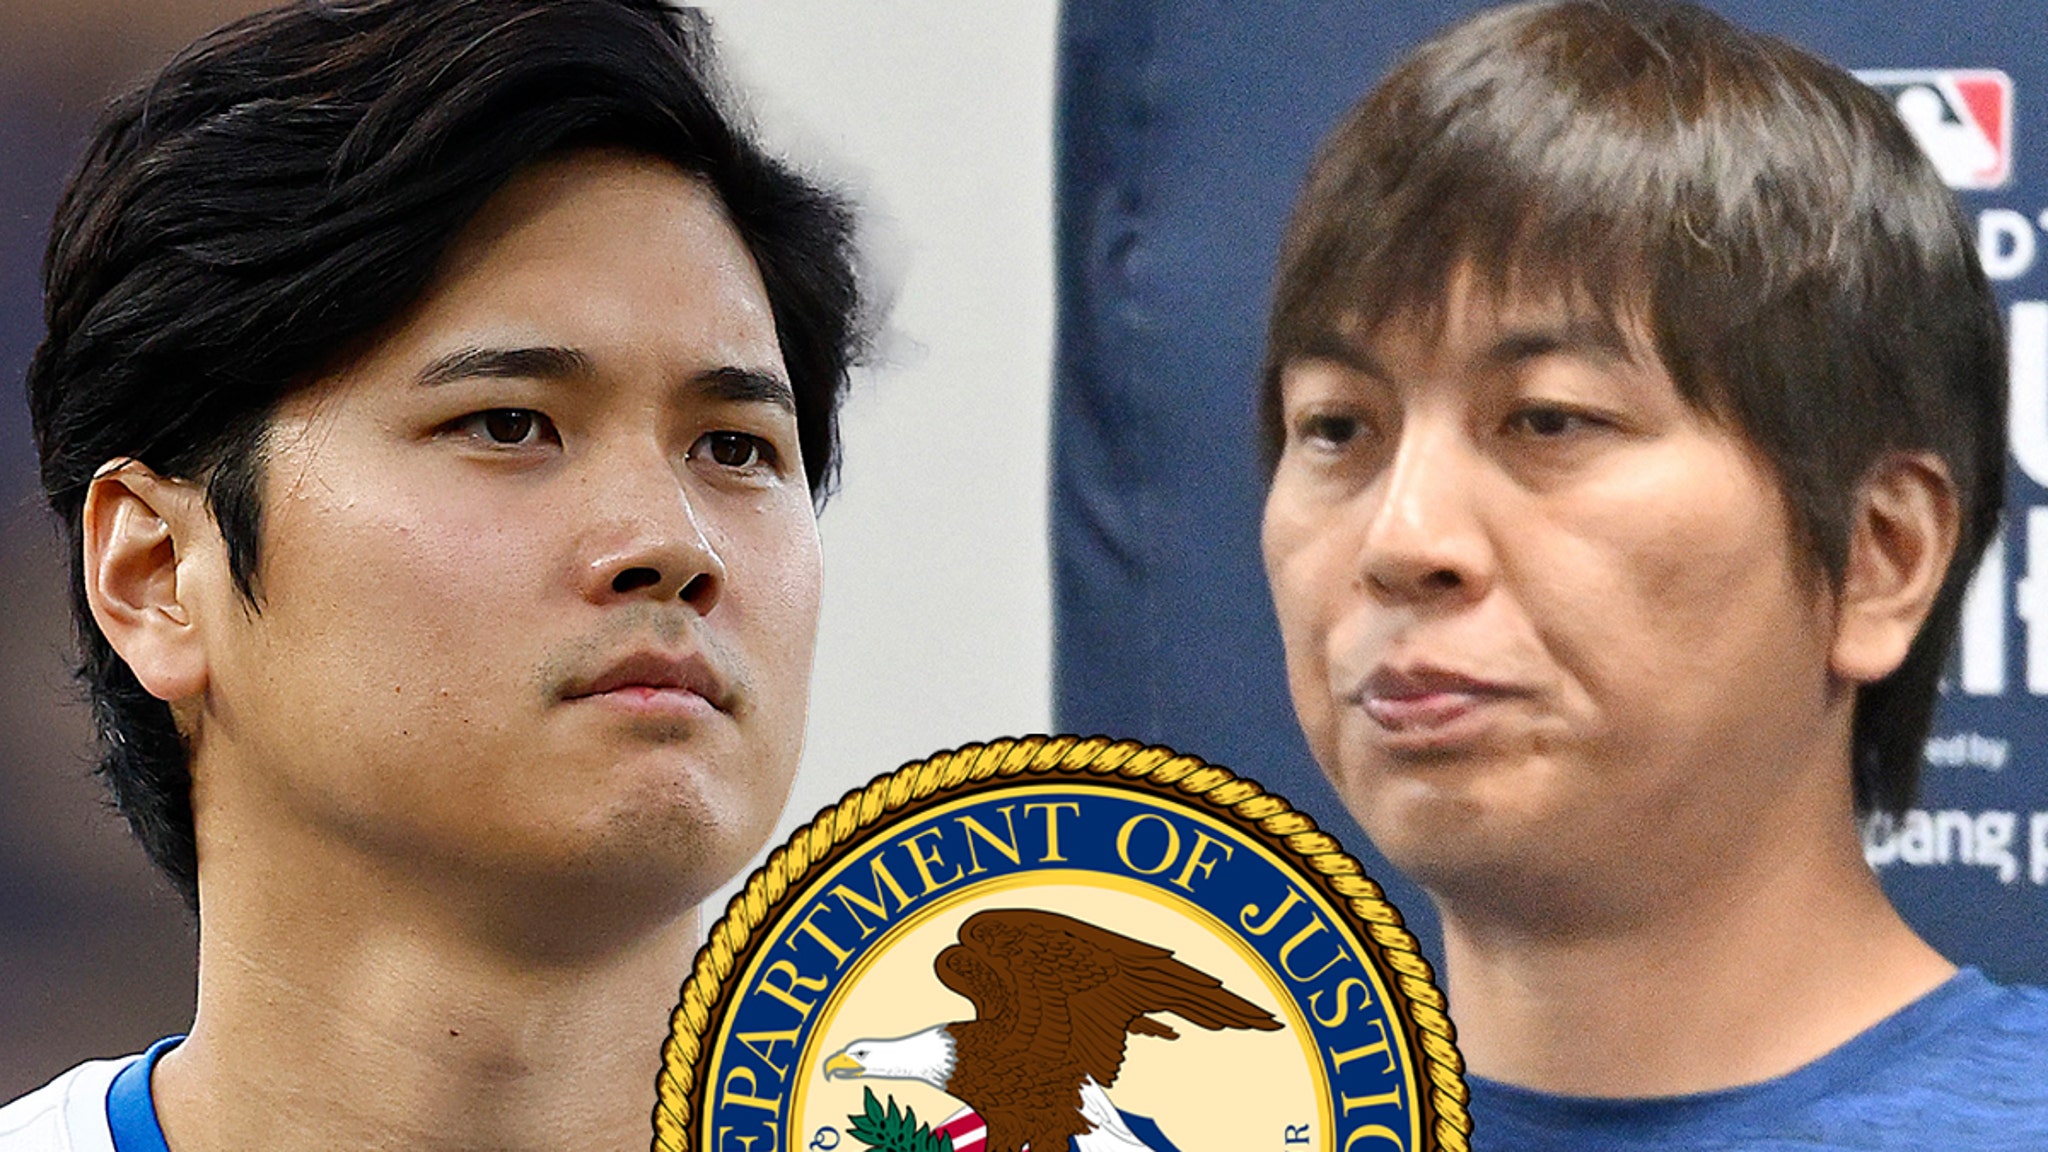 Shohei Ohtani's Interpreter Pleading Guilty To Federal Charges, Facing Up To 33 Yrs